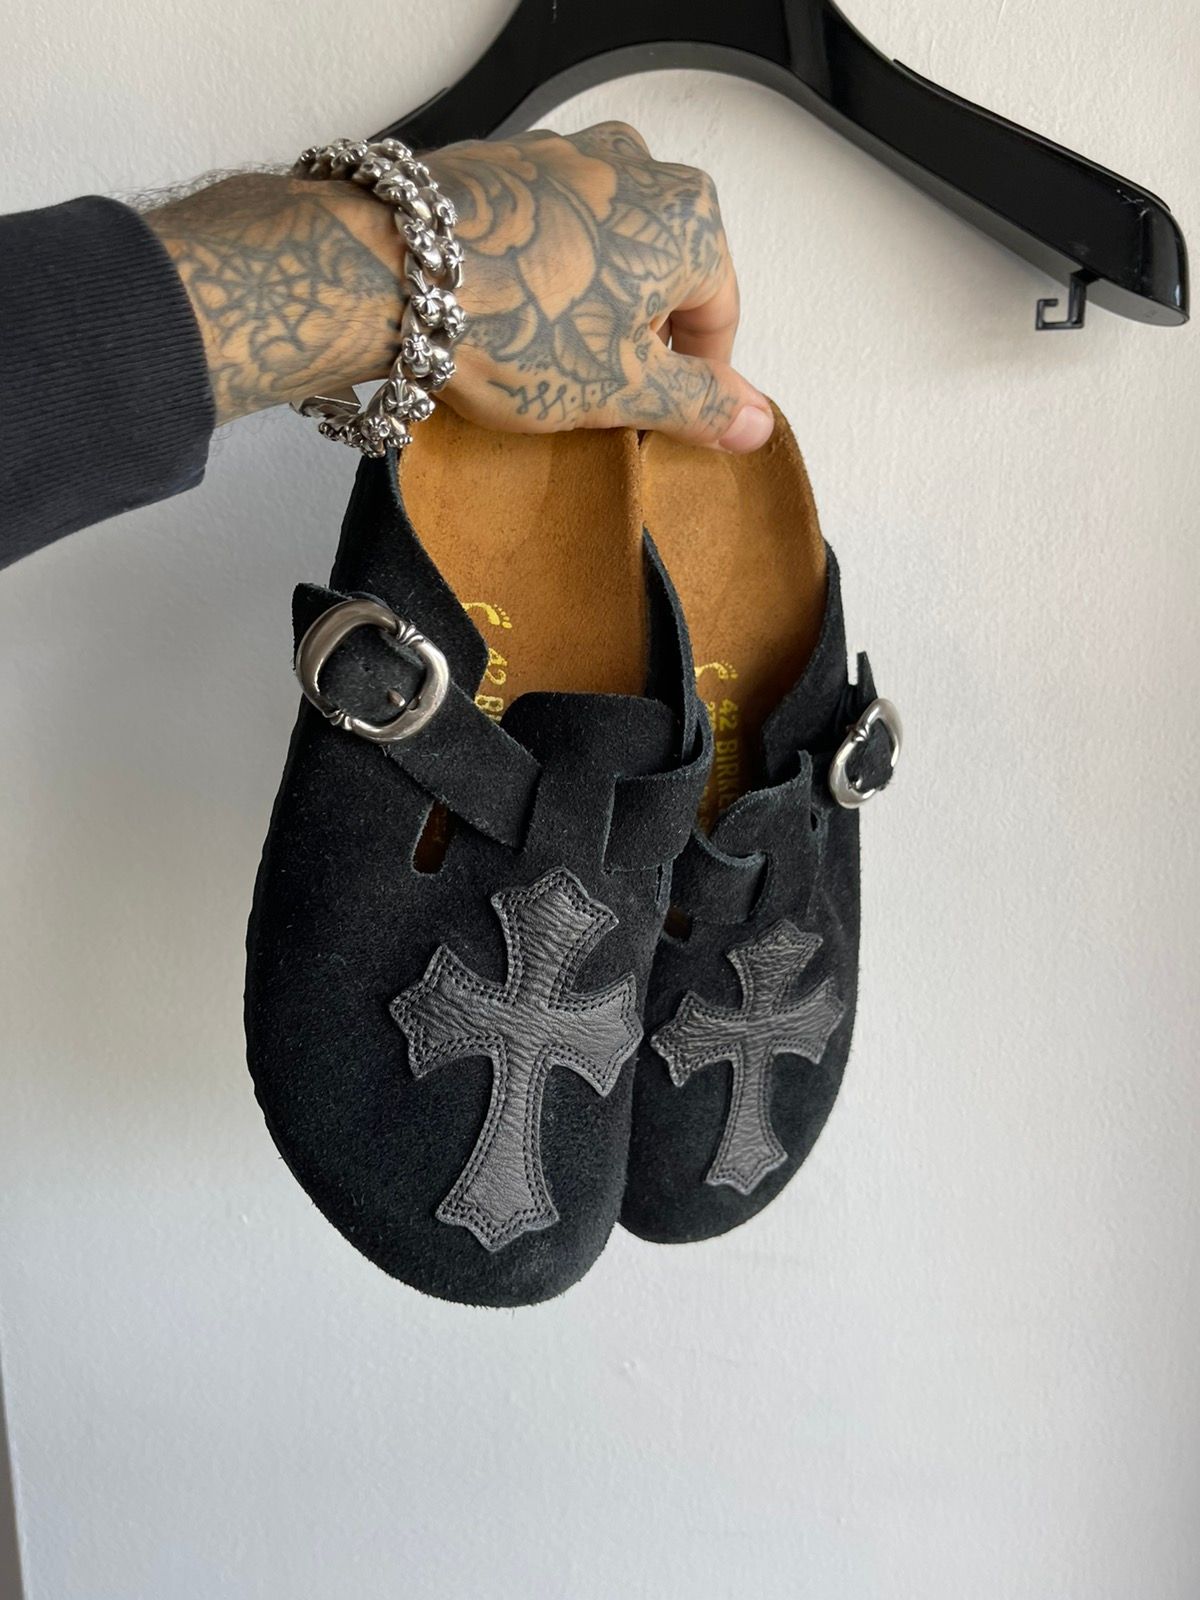 Chrome Hearts x Birkenstock Cemetery Cross Shoes Sandals – 4GSELLER-NY